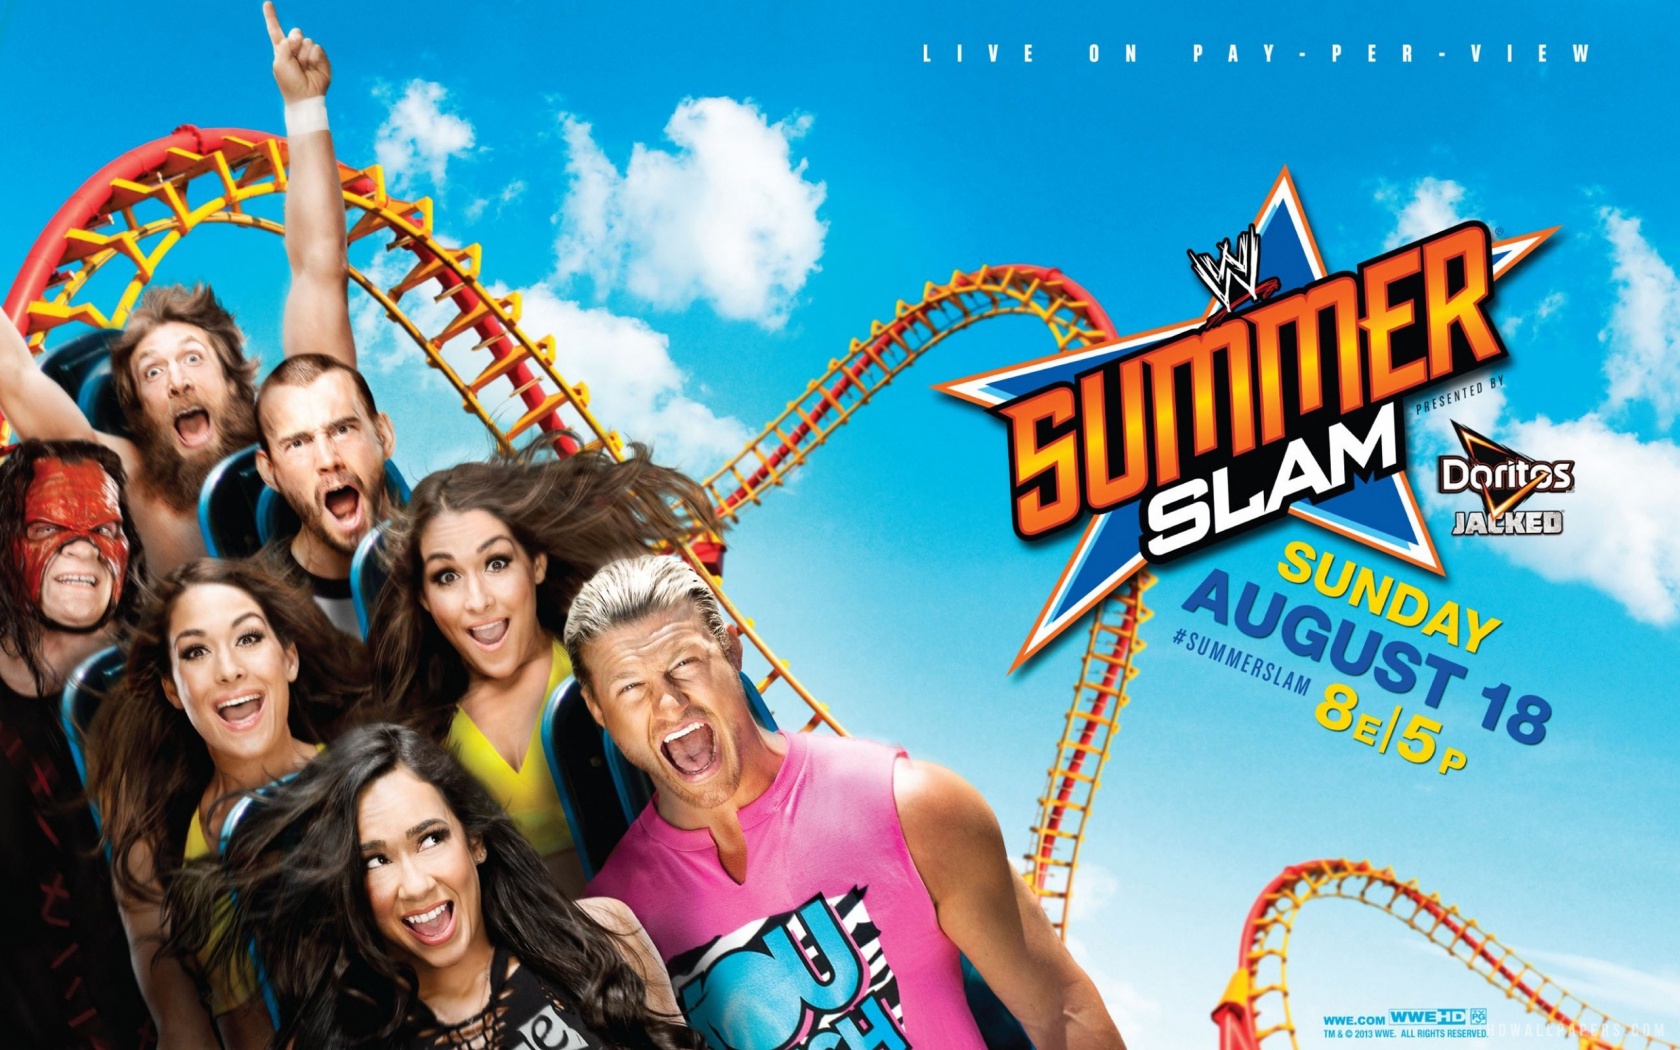 Archived: WWE SummerSlam 2013 Predictions - archived